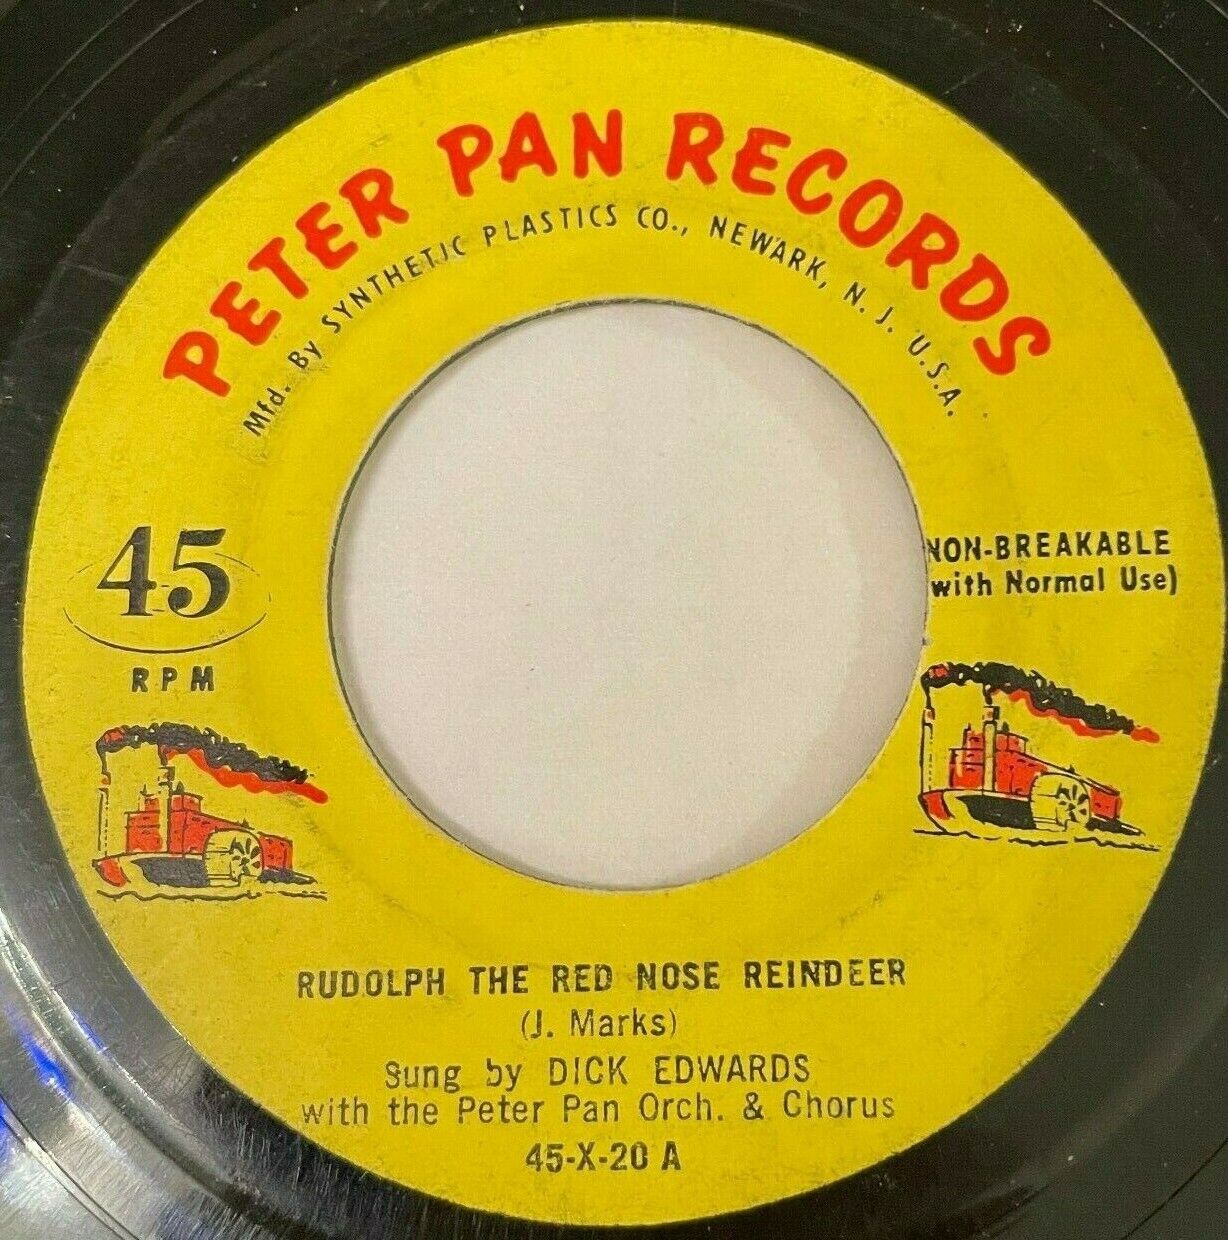 Rudolph The Red-Nosed Reindeer Vinyl Record Vintage 45